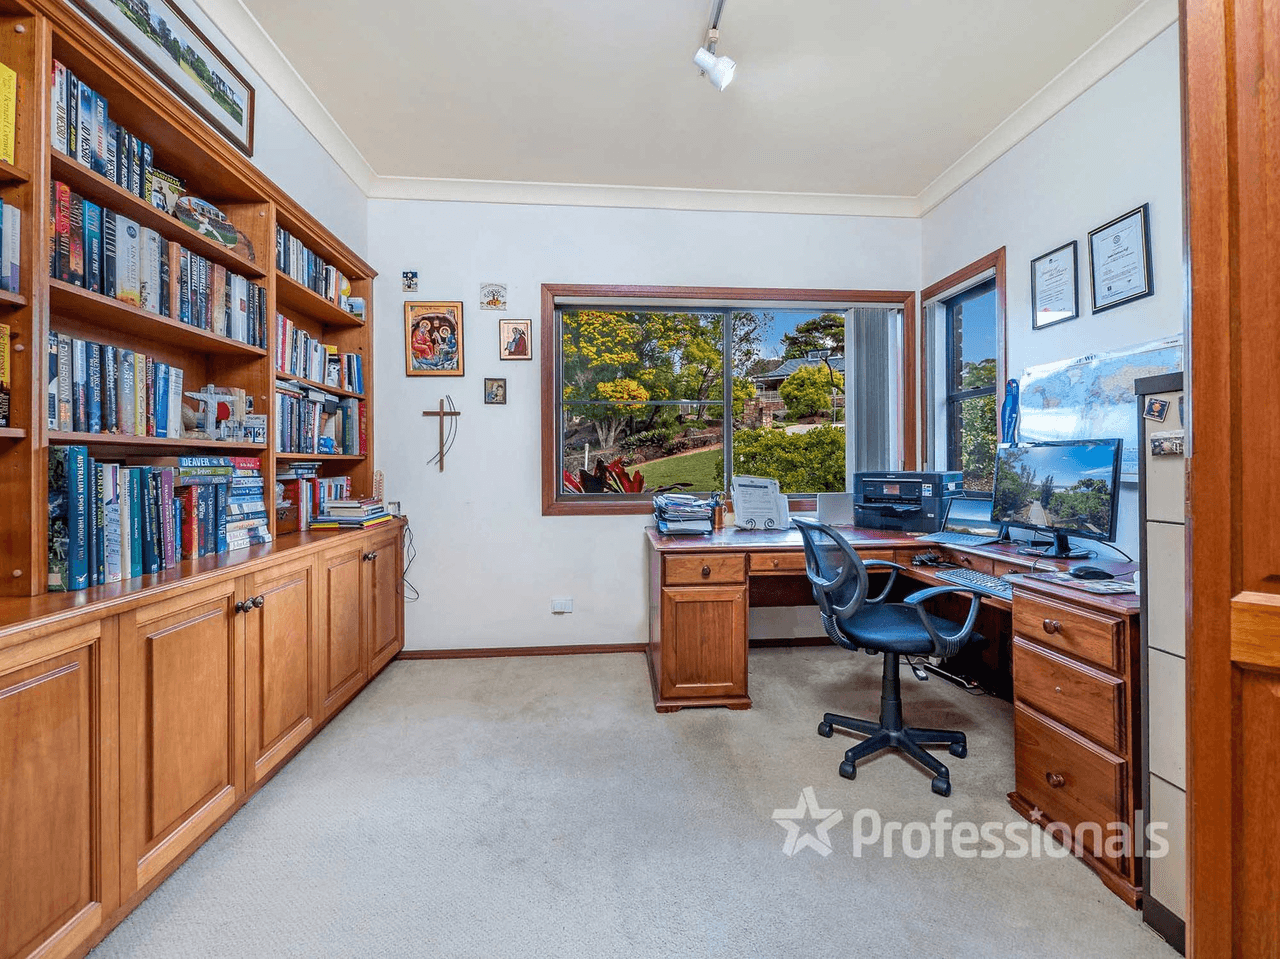 55 Beaumont Drive, East Lismore, NSW 2480